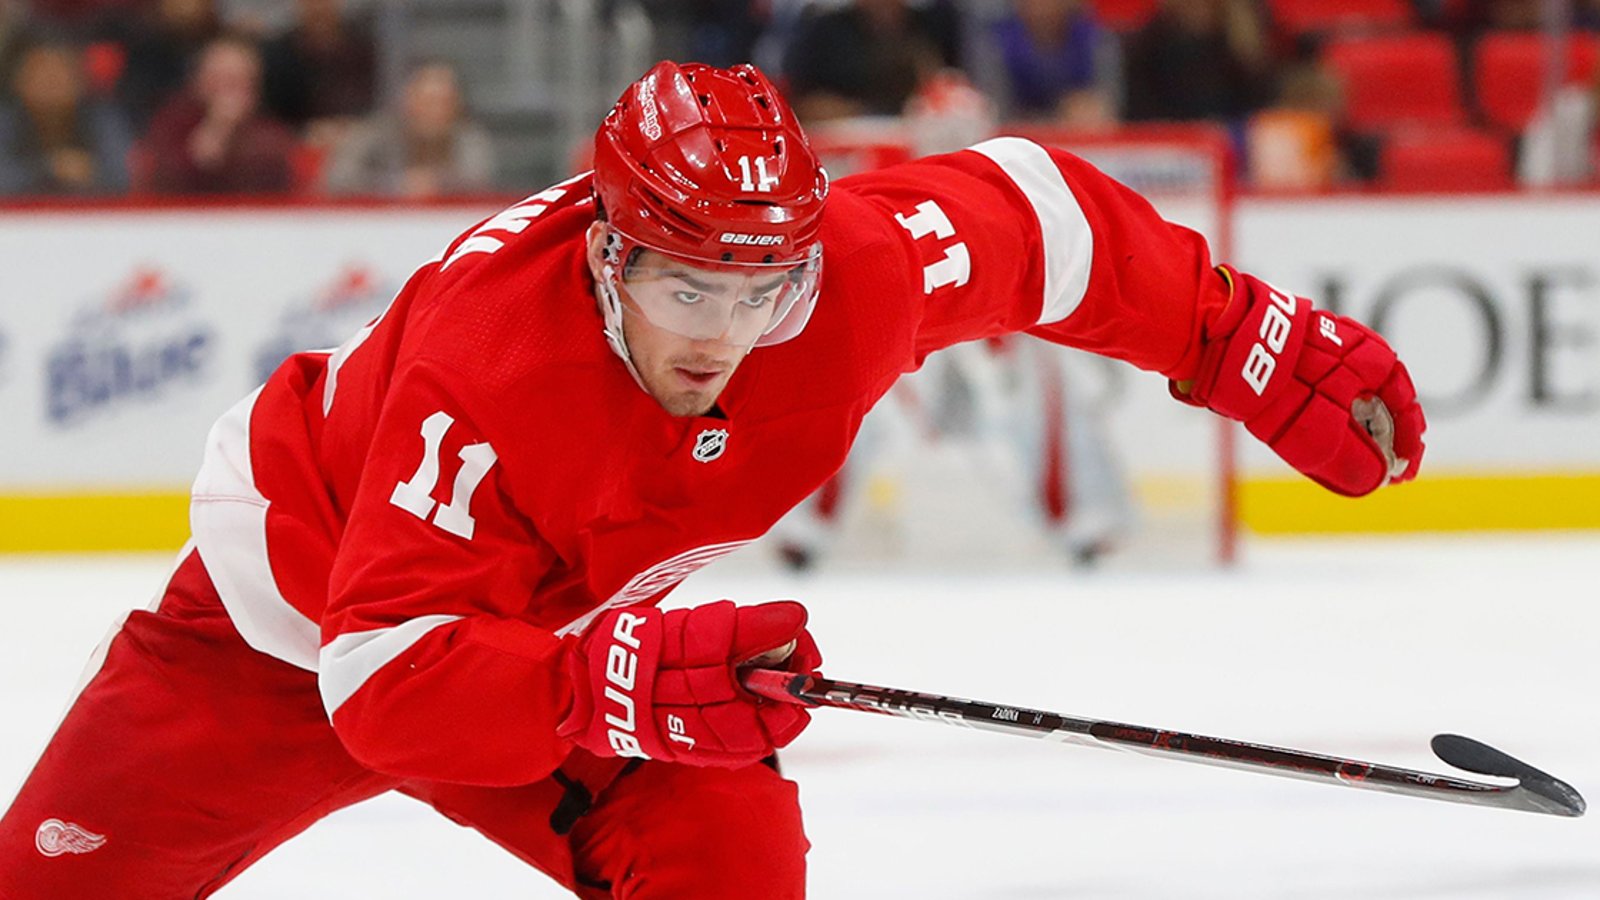 Report: Red Wings lay out plans for top pick Zadina